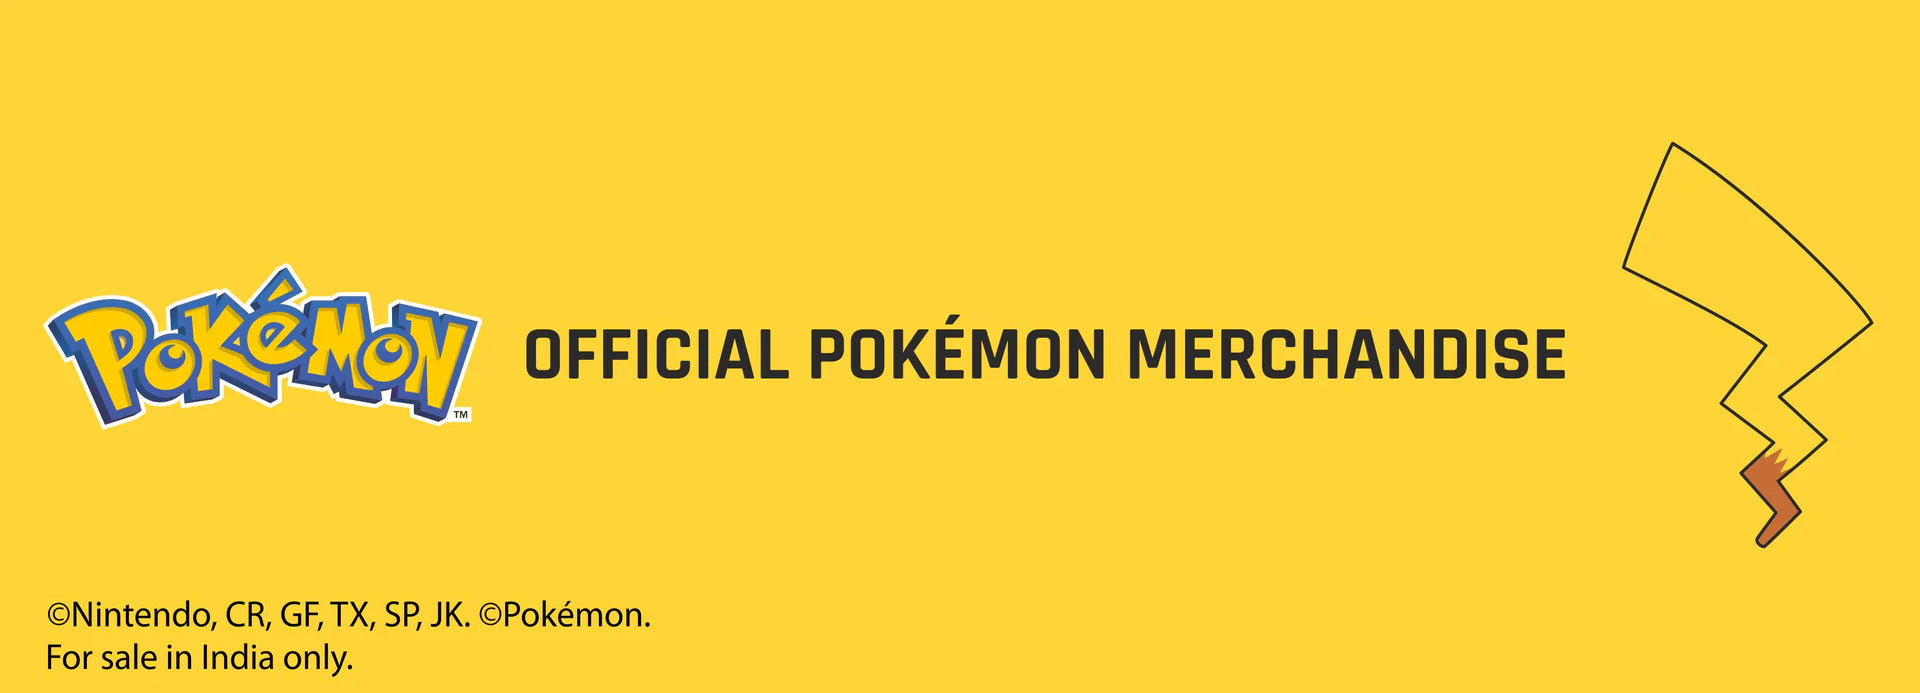 pokemon official merch first time in India